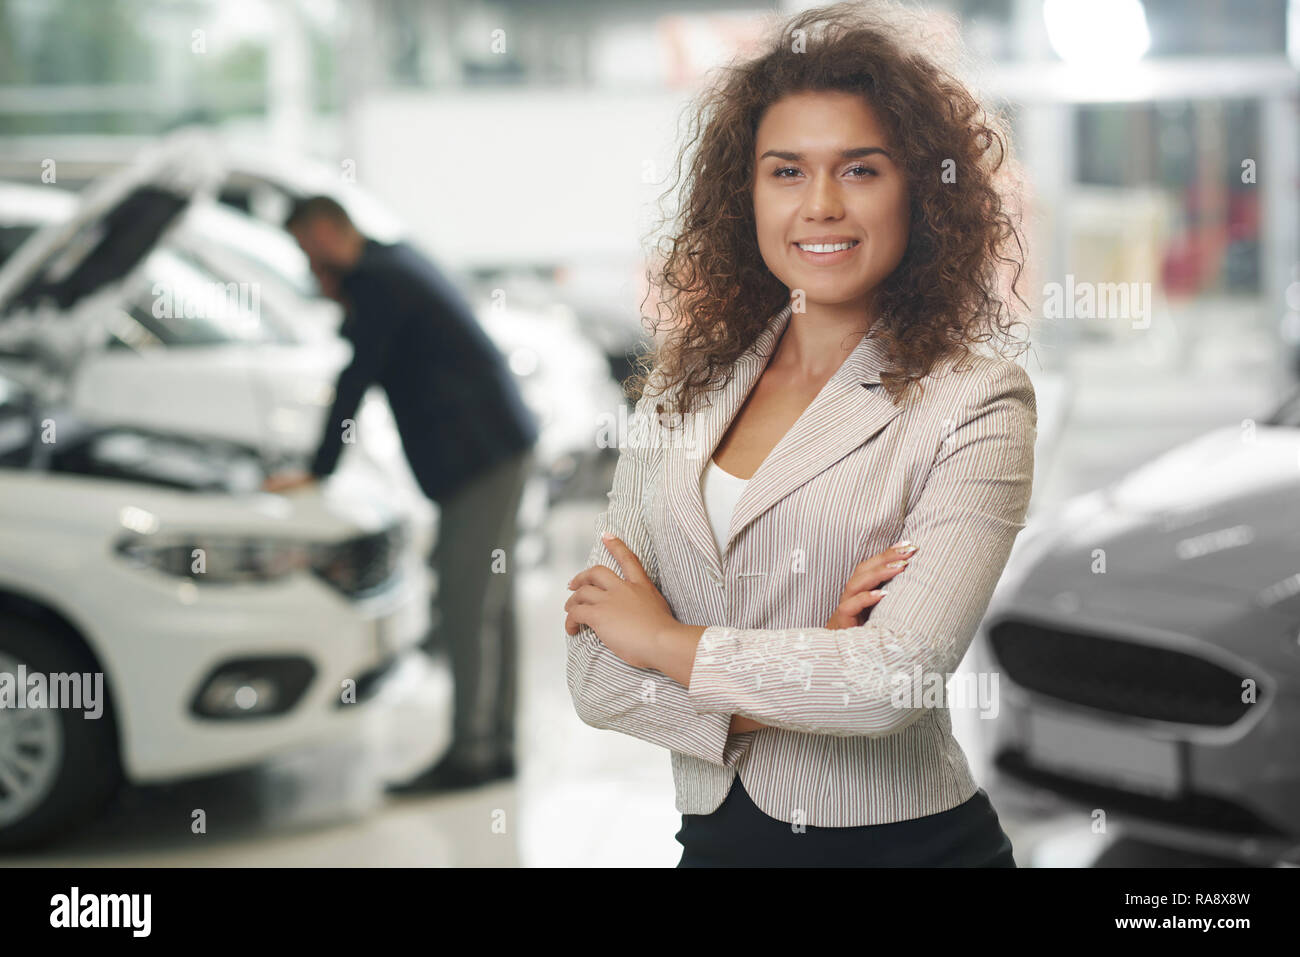 Gorgeous female manager posing in car dealership. Charming woman with curly hair looking at camera, smiling. Car dealer working in car showroom. Man observing car behind. Stock Photo